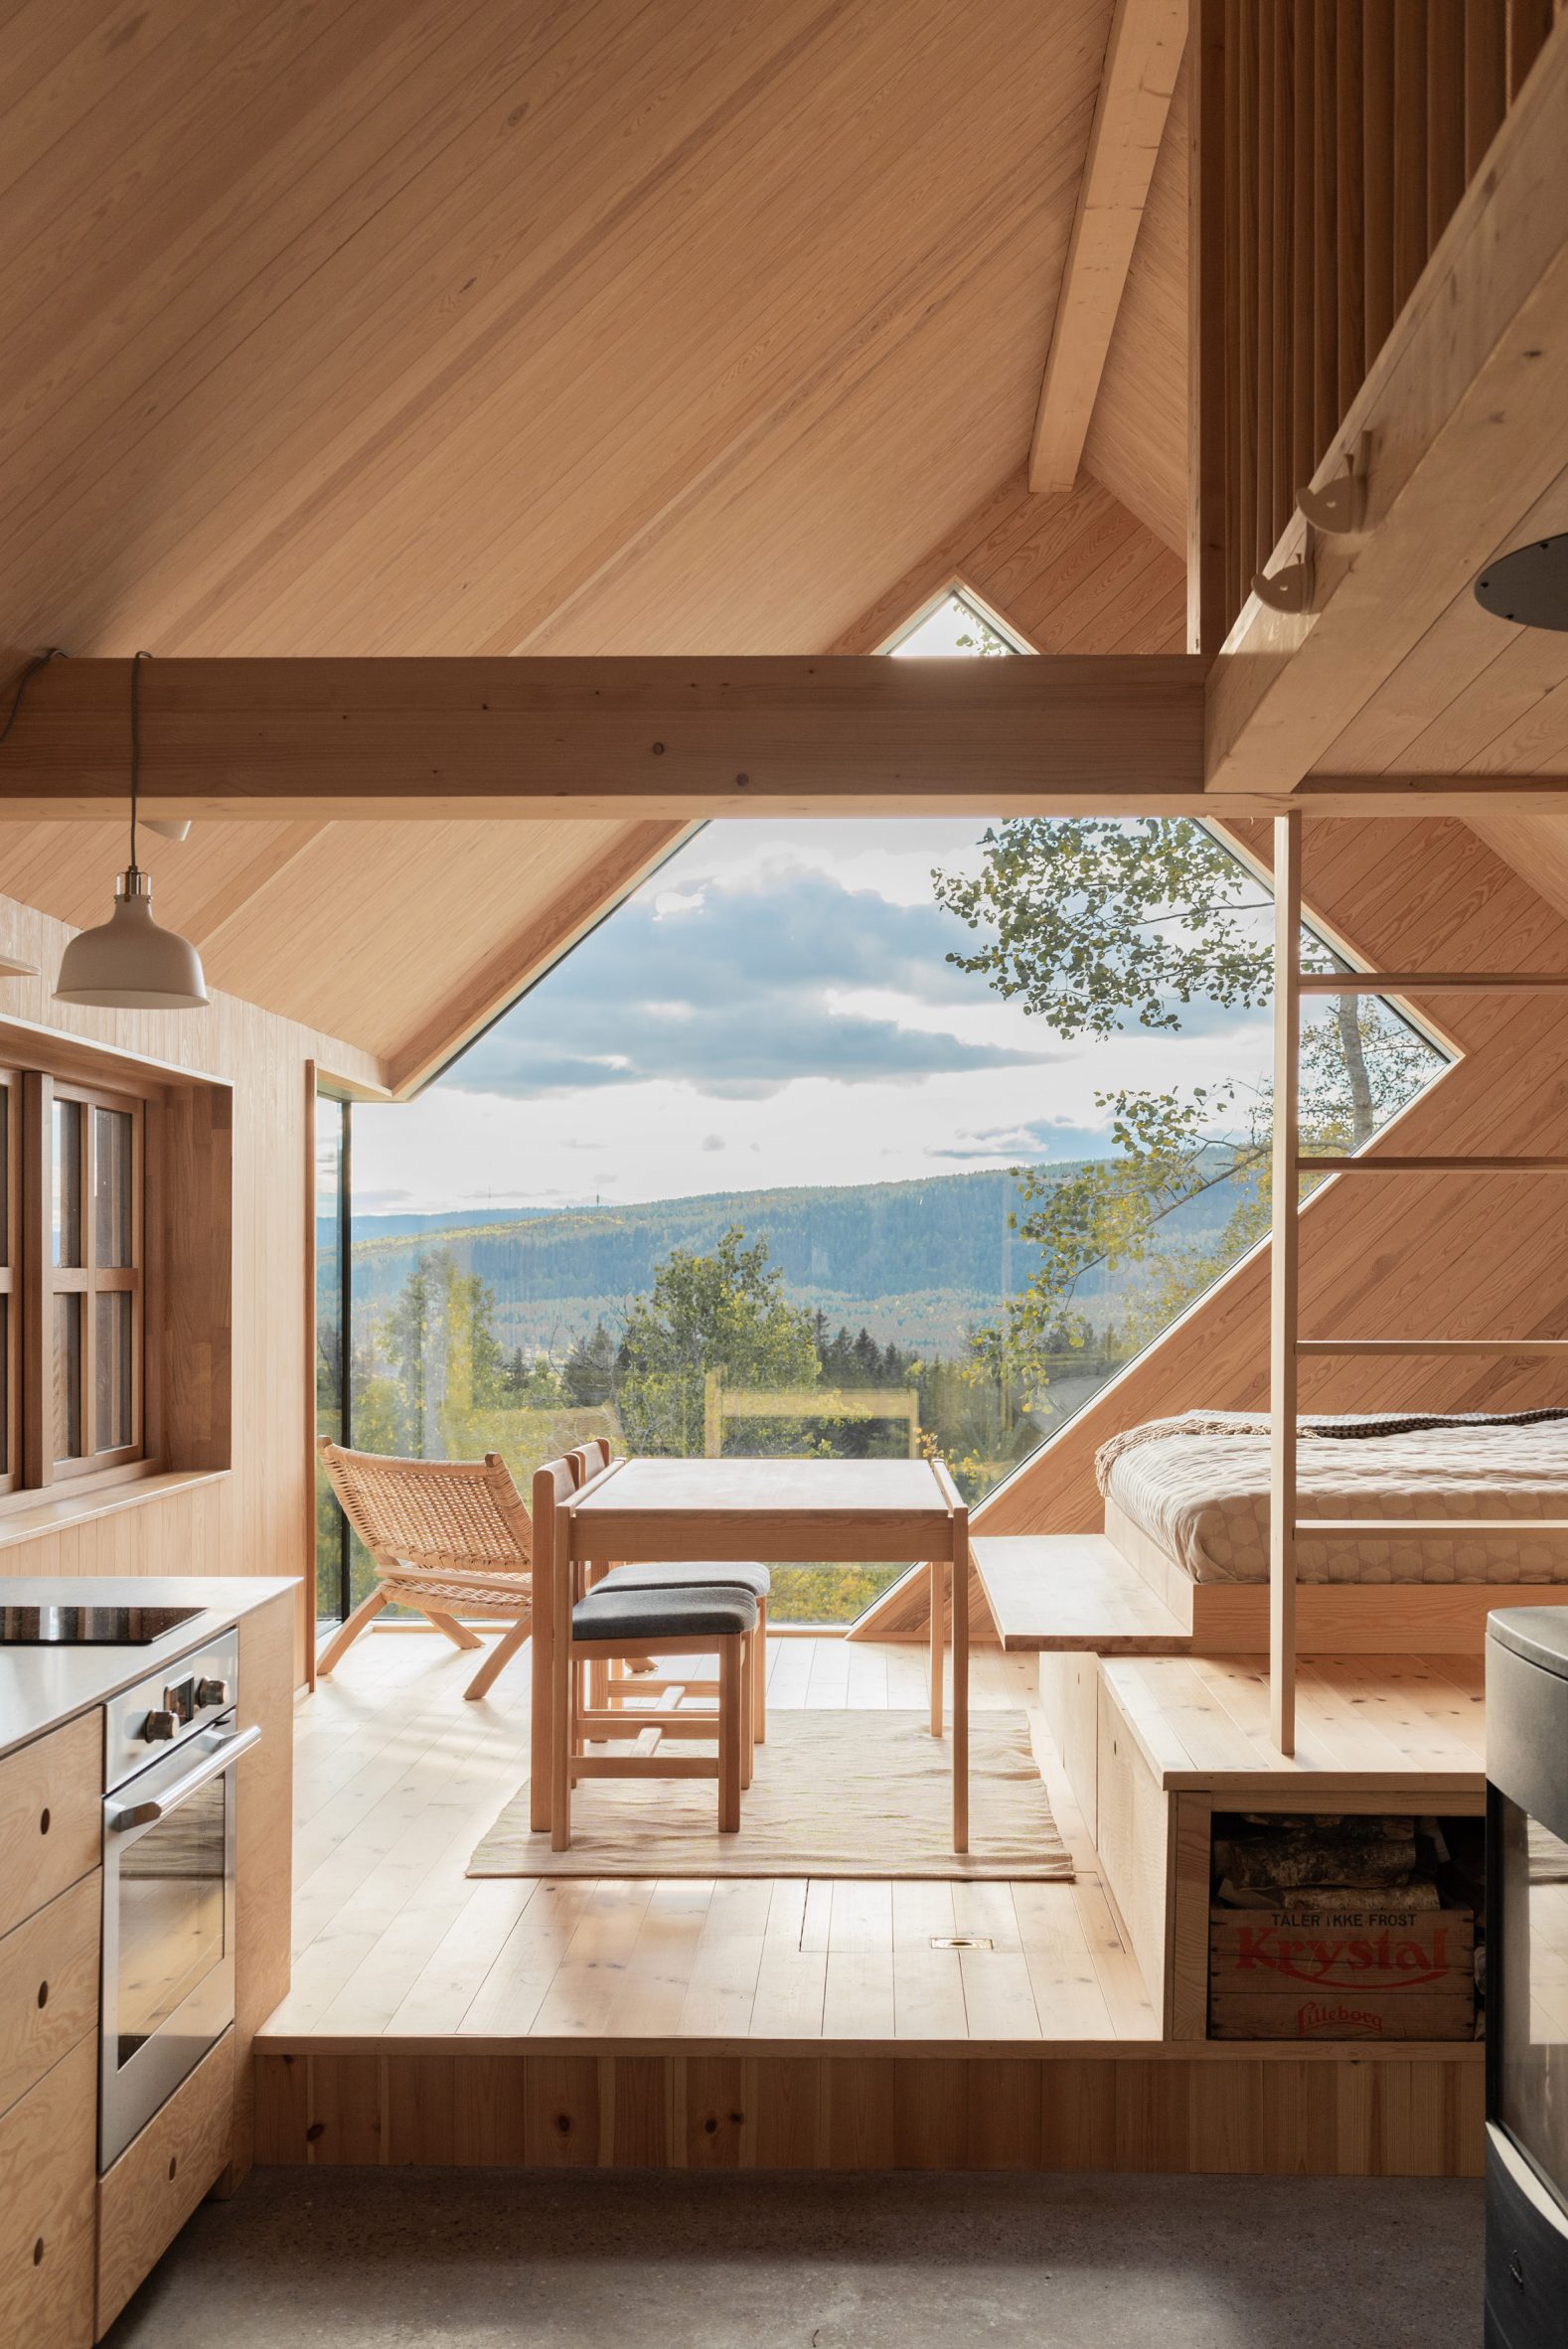 Living space in Cabin Nordmarka by Rever & Drage Architects